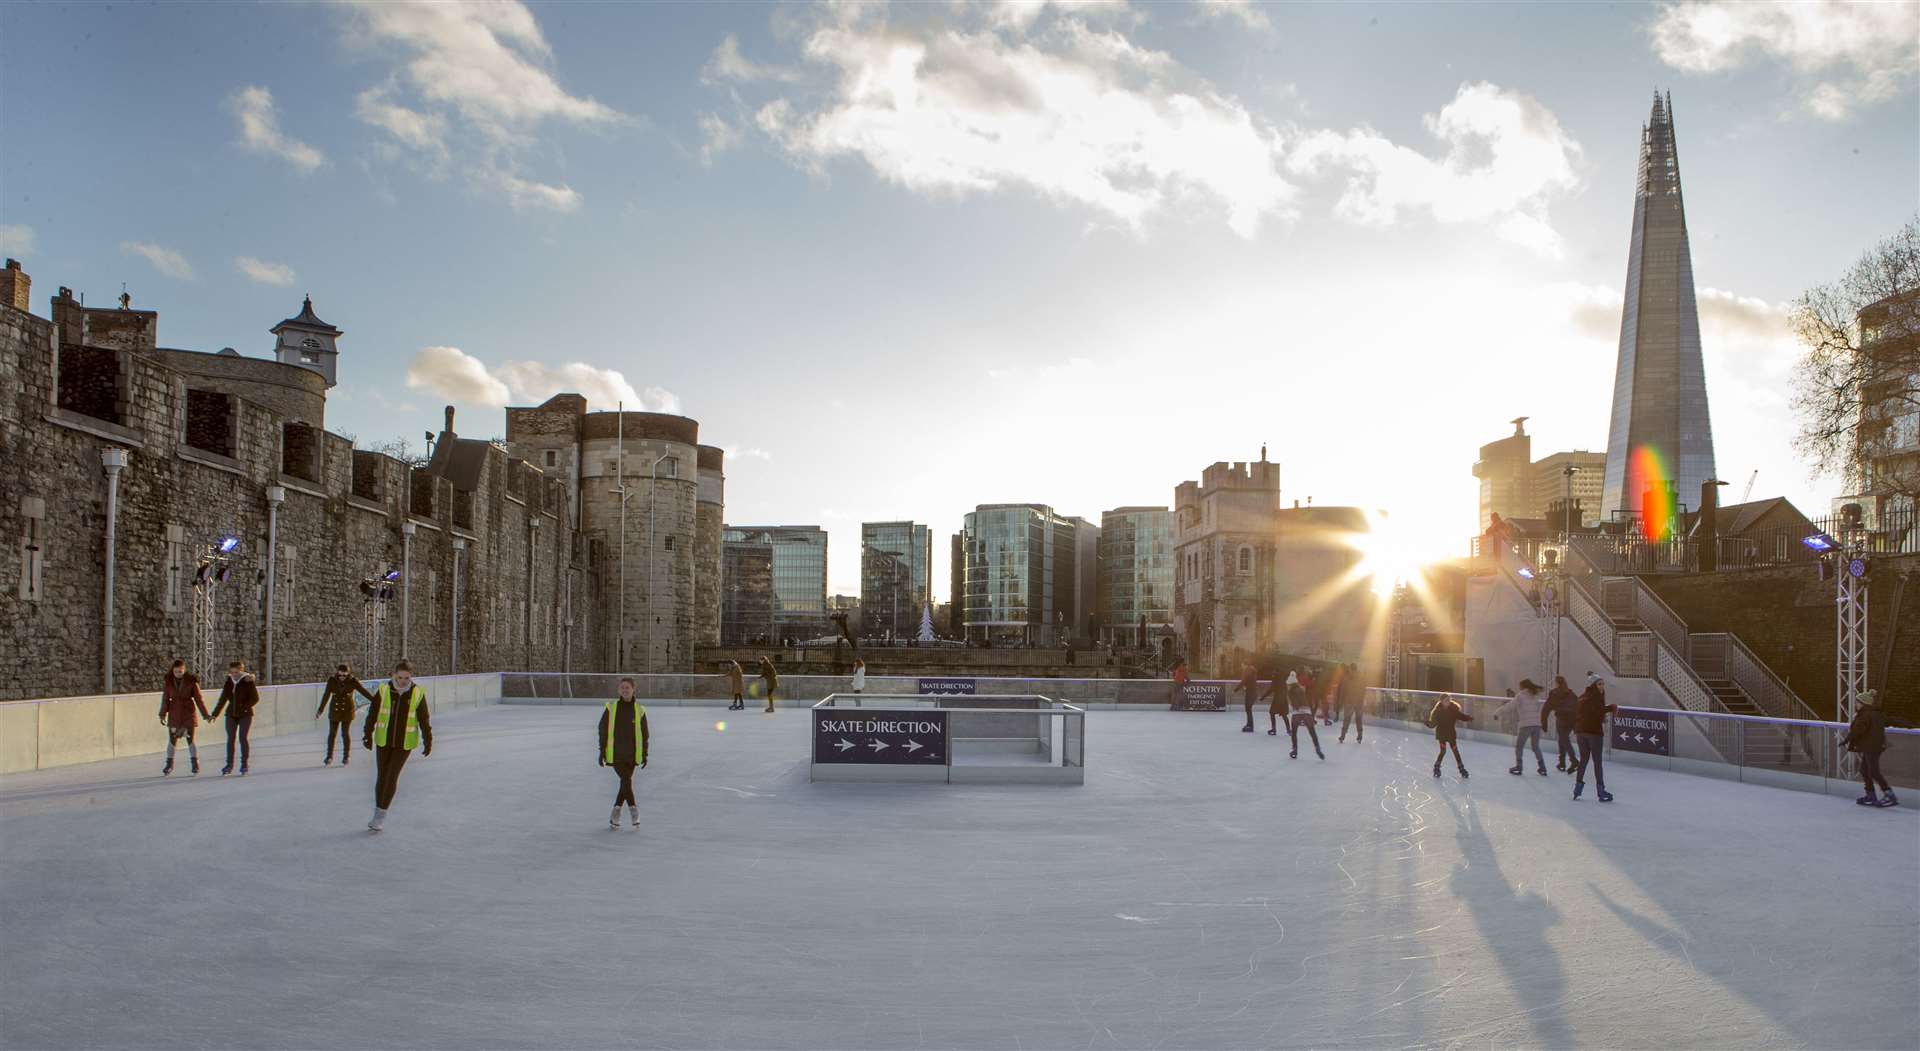 Tower of London ice rink for Christmas (20315606)